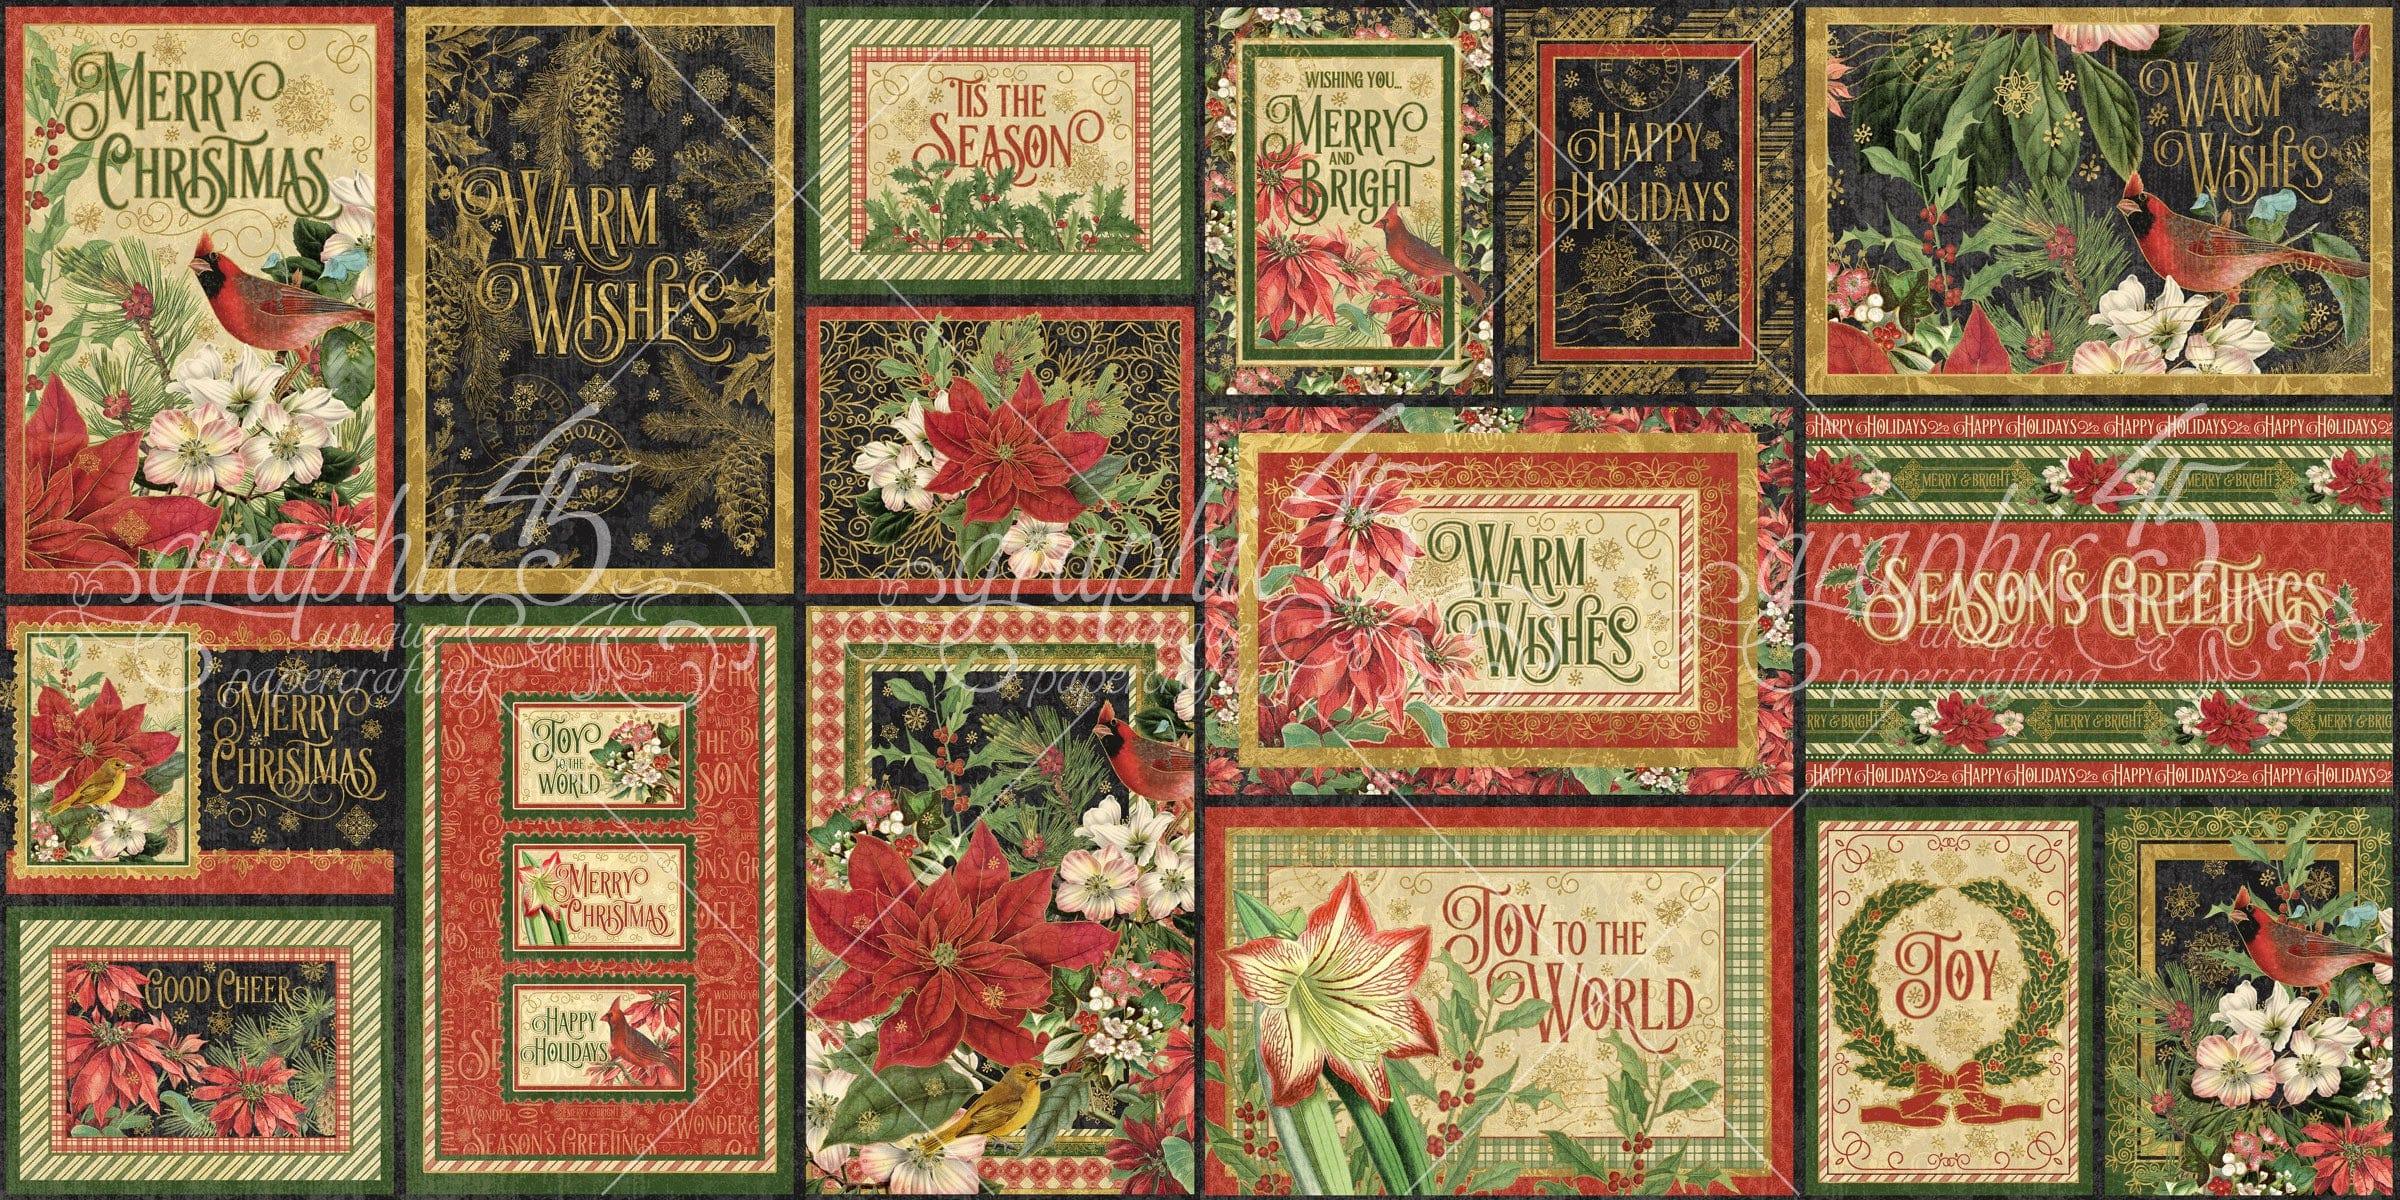 Warm Wishes Collection 4 x 6 & 3 x 4 Journaling Cards by Graphic 45 - Scrapbook Supply Companies